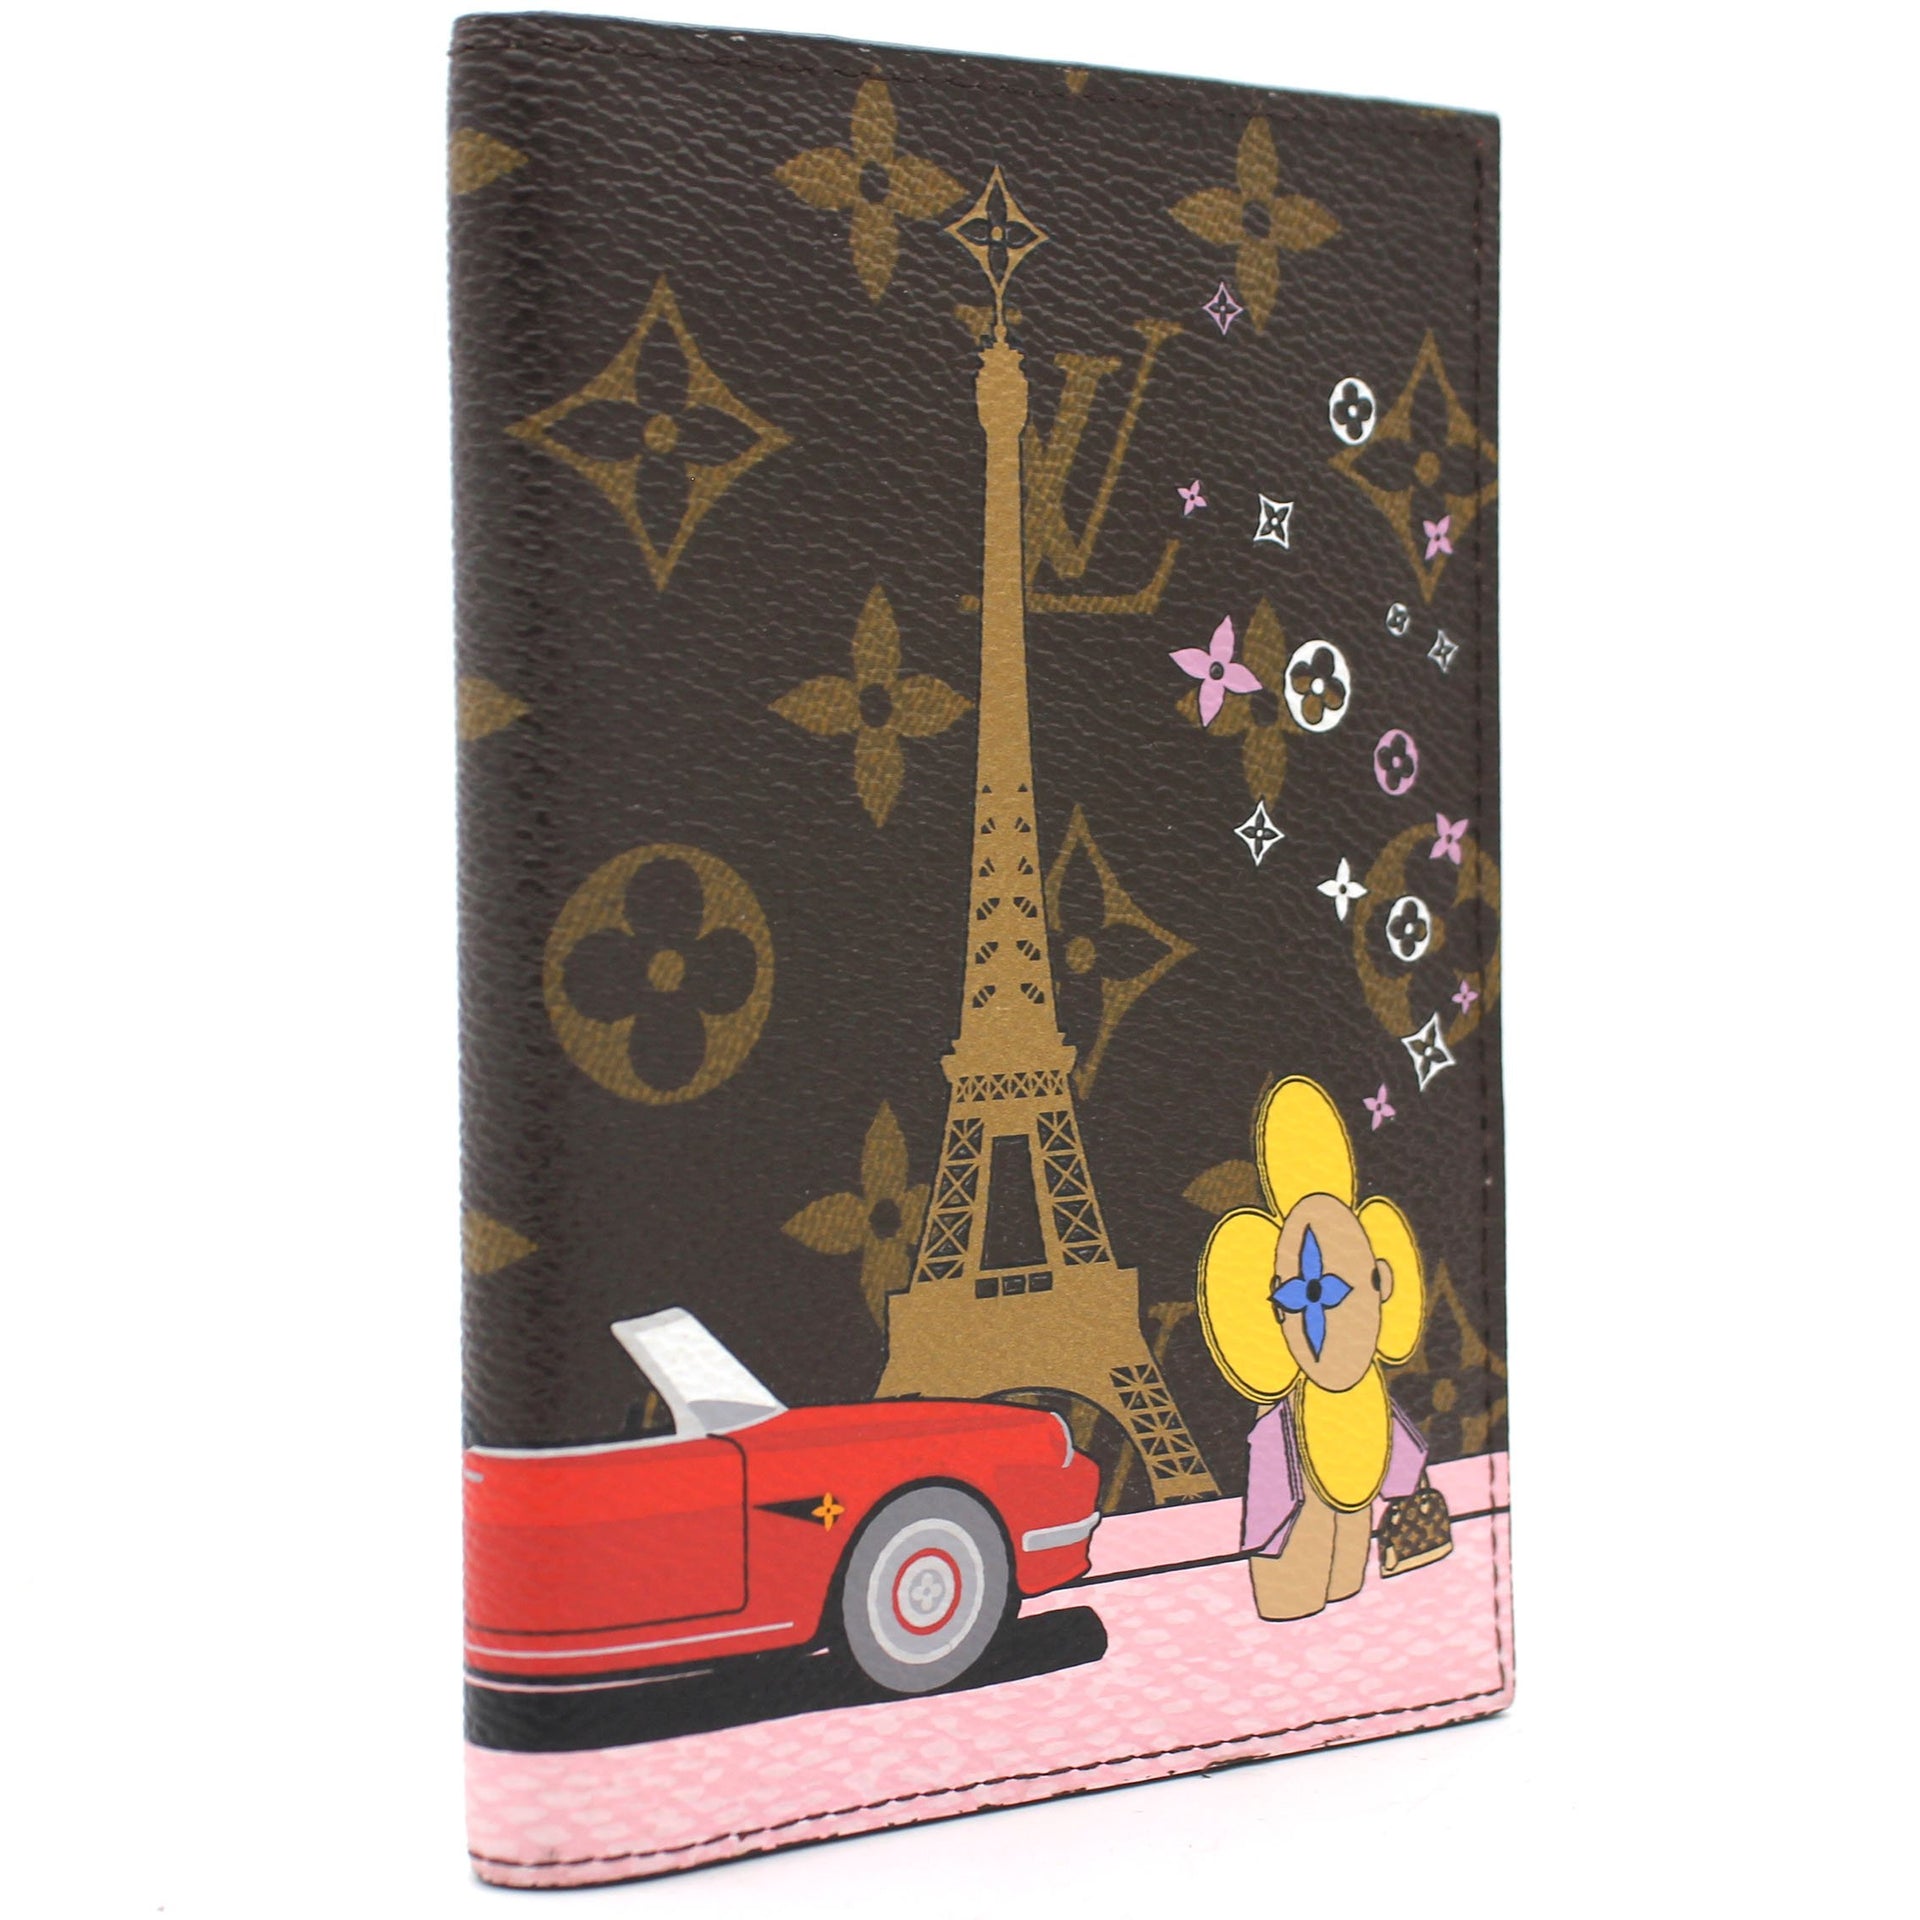 New in Box Louis Vuitton Limited Edition Paris Passport Cover at